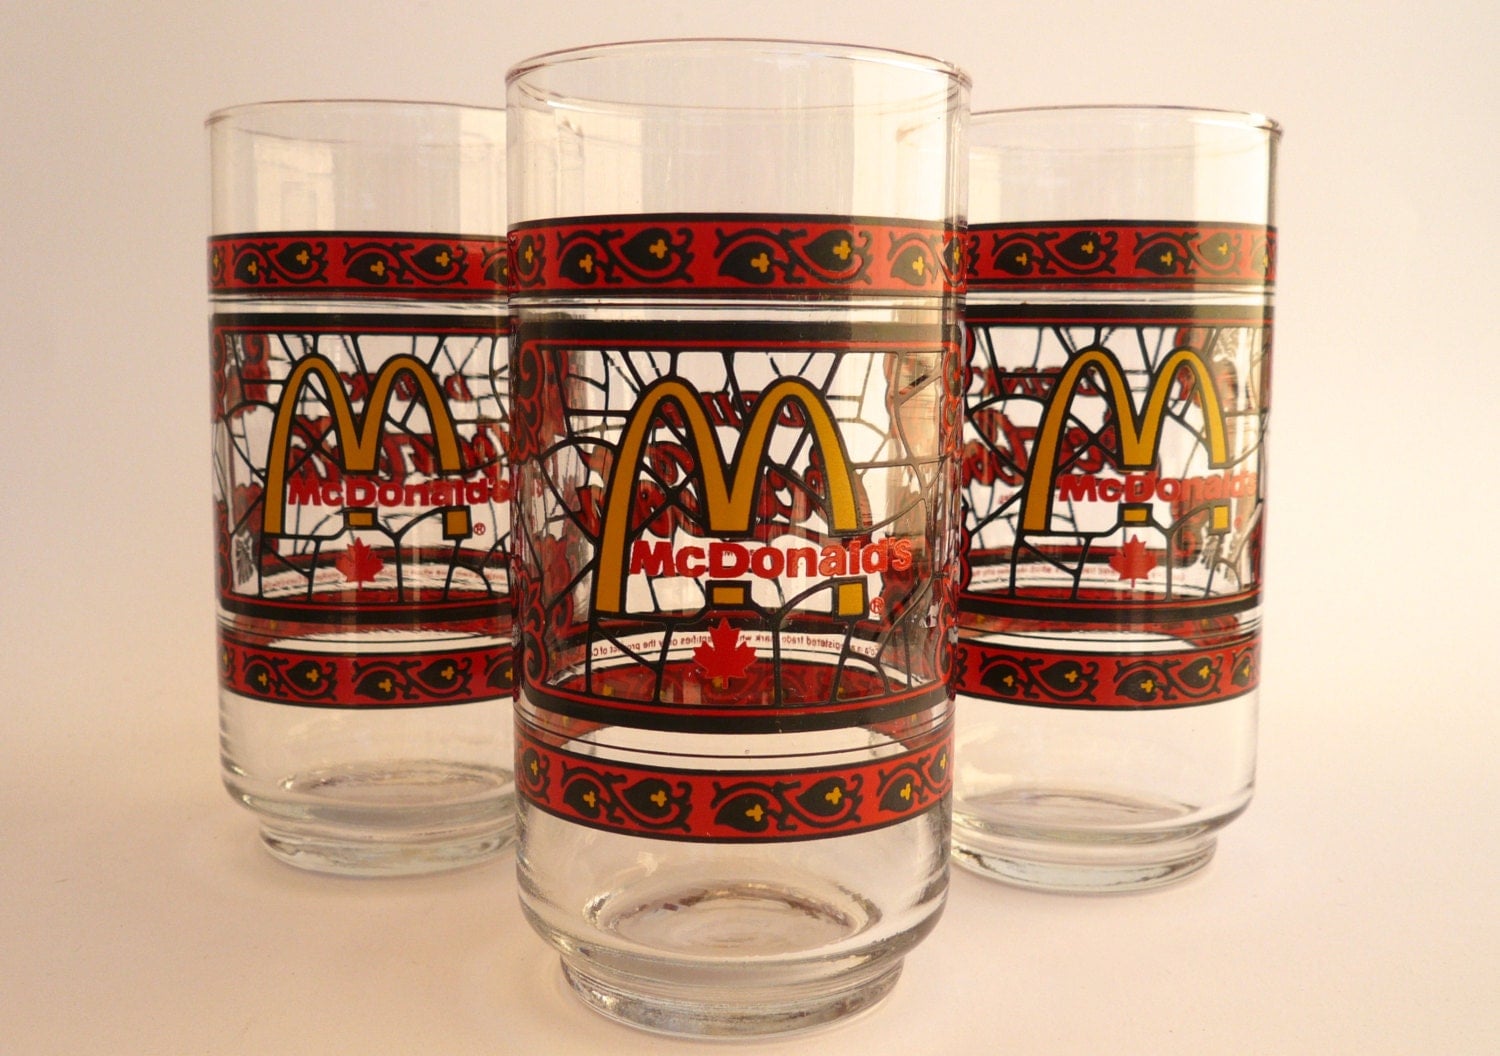 McDonalds Drinking Glasses / CocaCola by MyOtherFootsLaughing